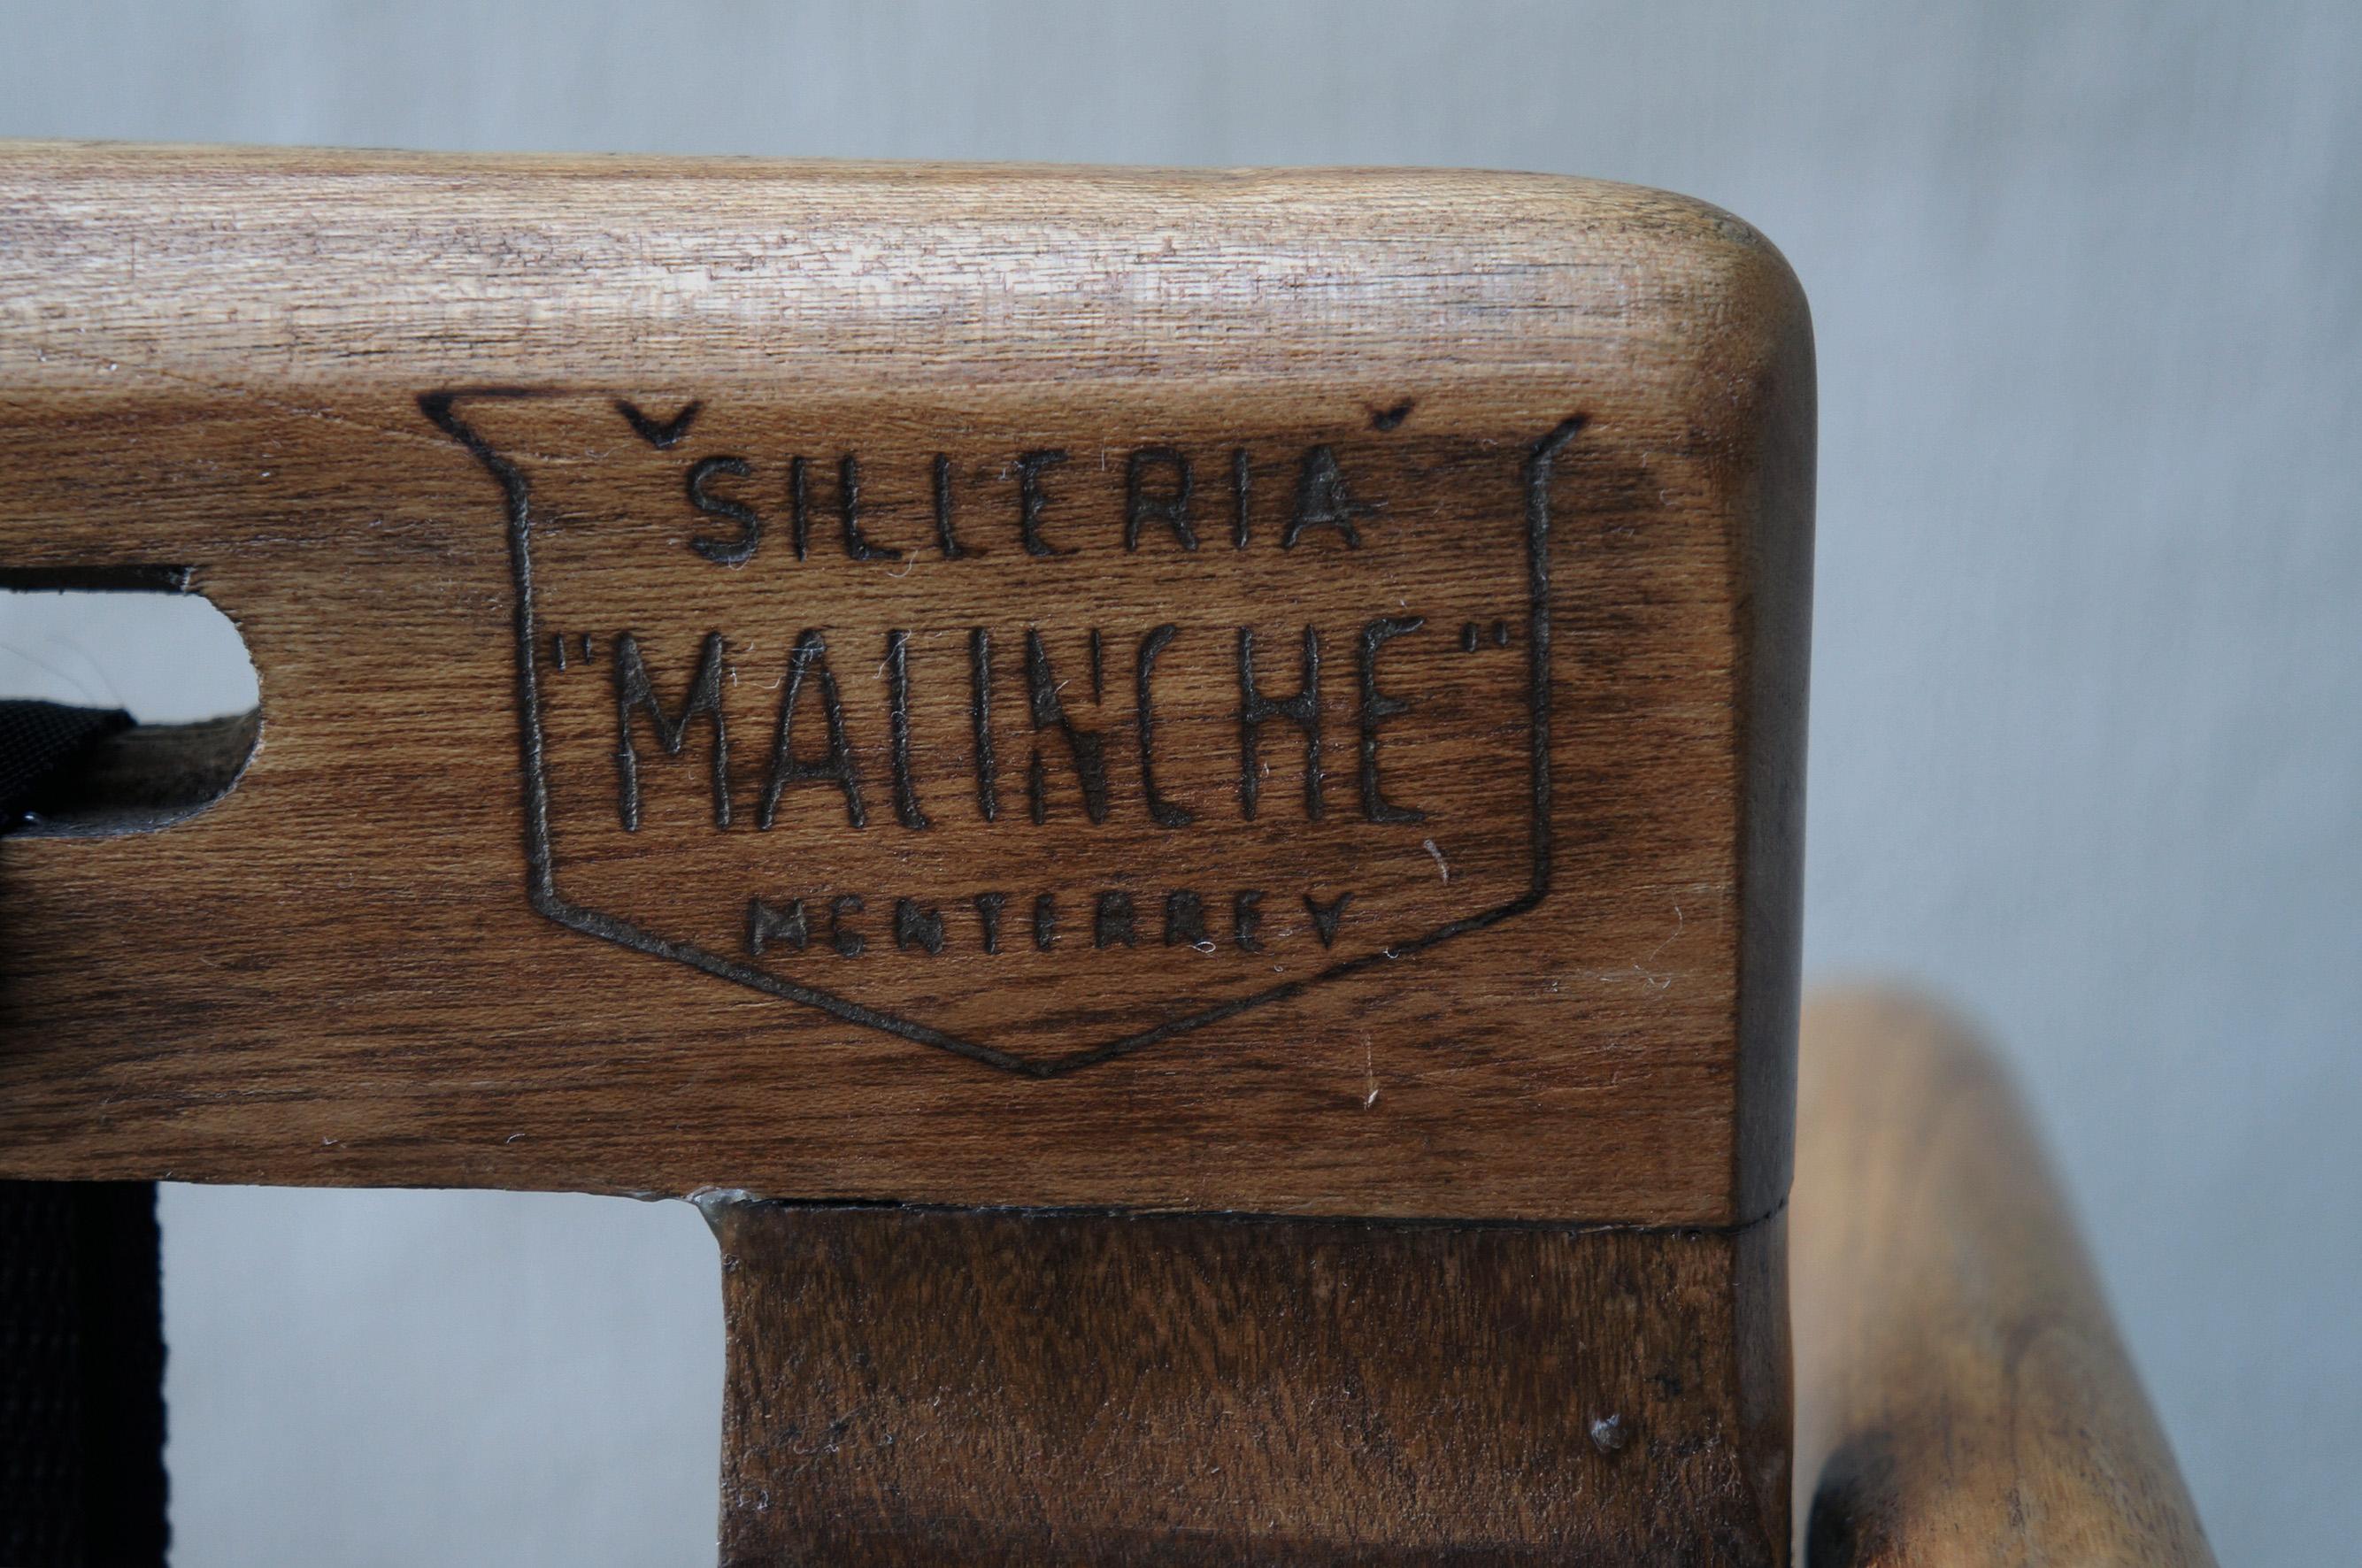 The Malinche factory crafted hundreds of unique furniture designs from the beginning of the last century until its closure in the 1960s after a devastating fire. Today, Malinche furniture is remembered for the quality of its craftsmanship as well as